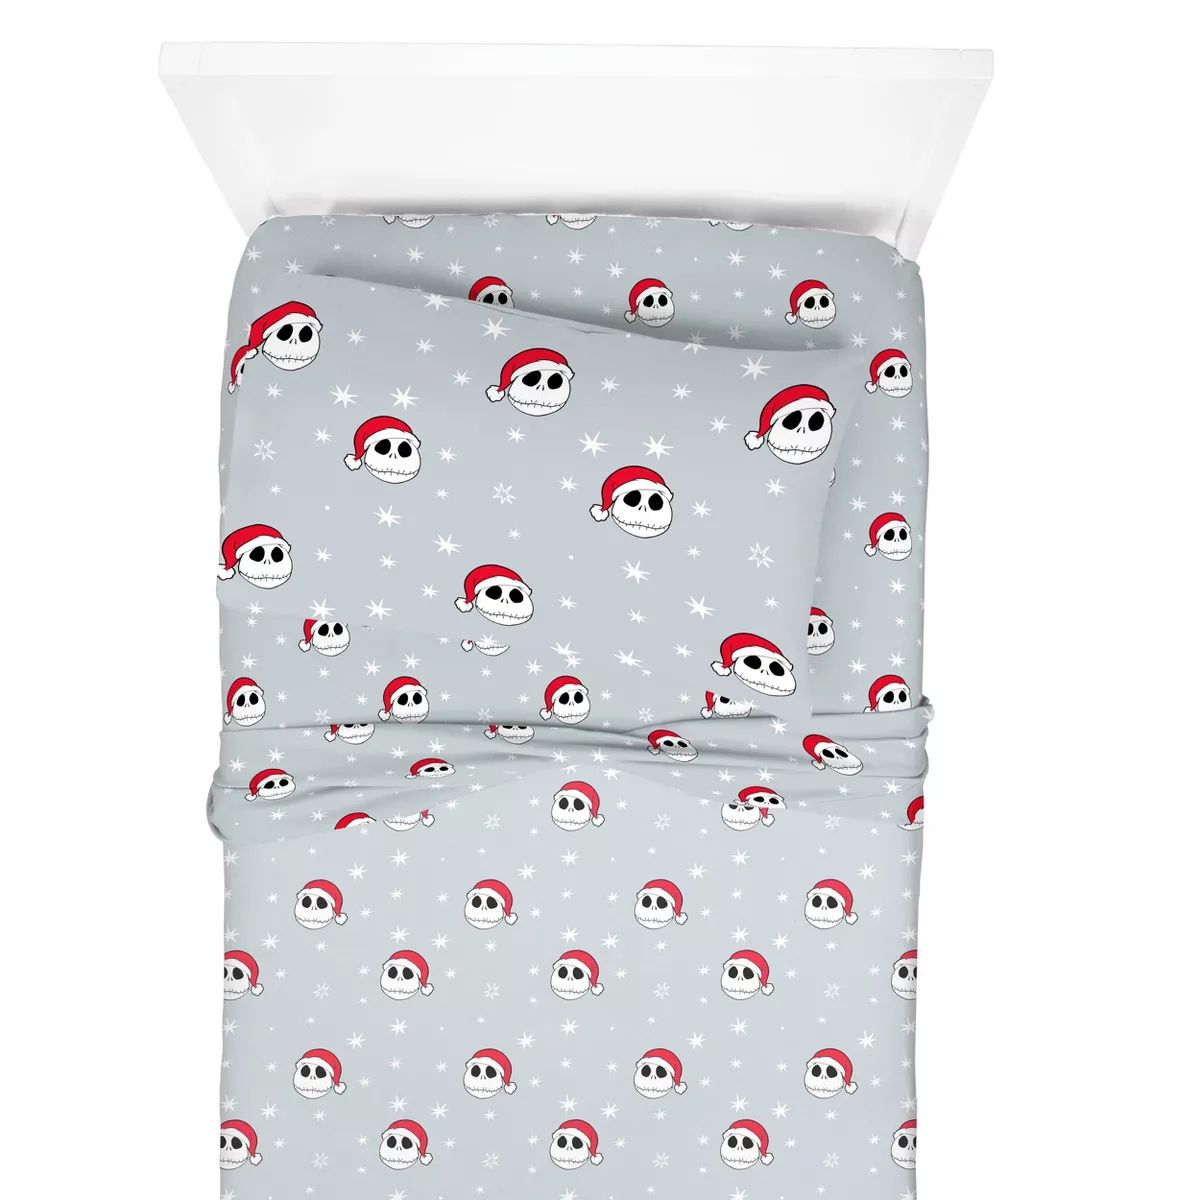 Twin Disney Nightmare Before Christmas Santa Claws Flannel Rotary Sheet Set Red/Gray | Target